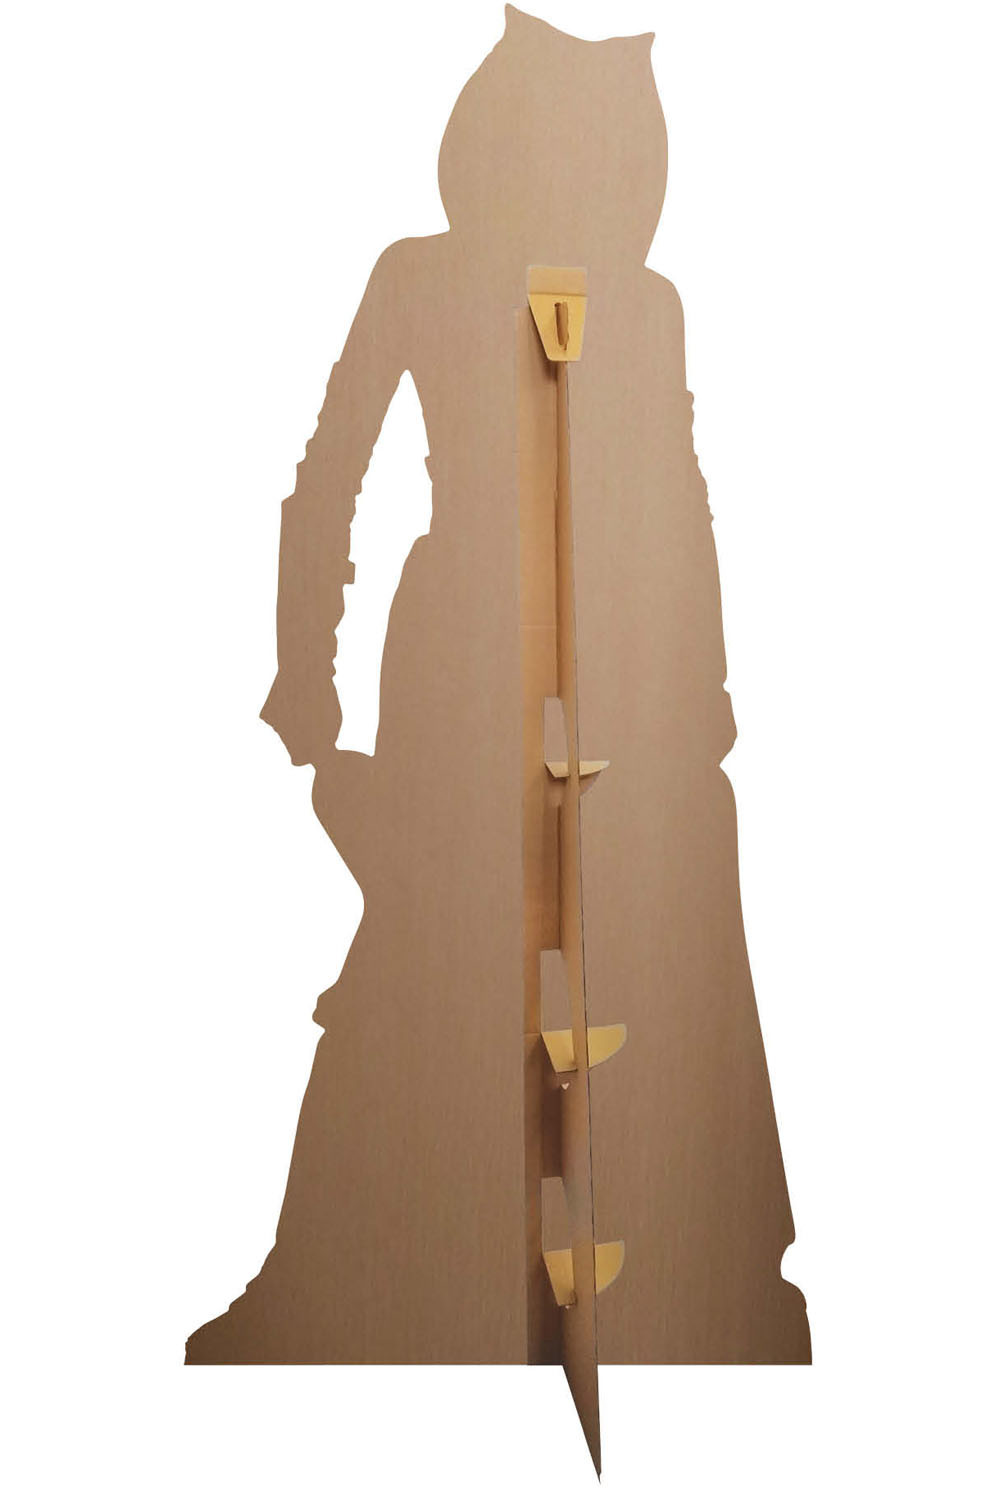 The Child (Baby Yoda) In The Pod Official Mandalorian Cardboard Cutout